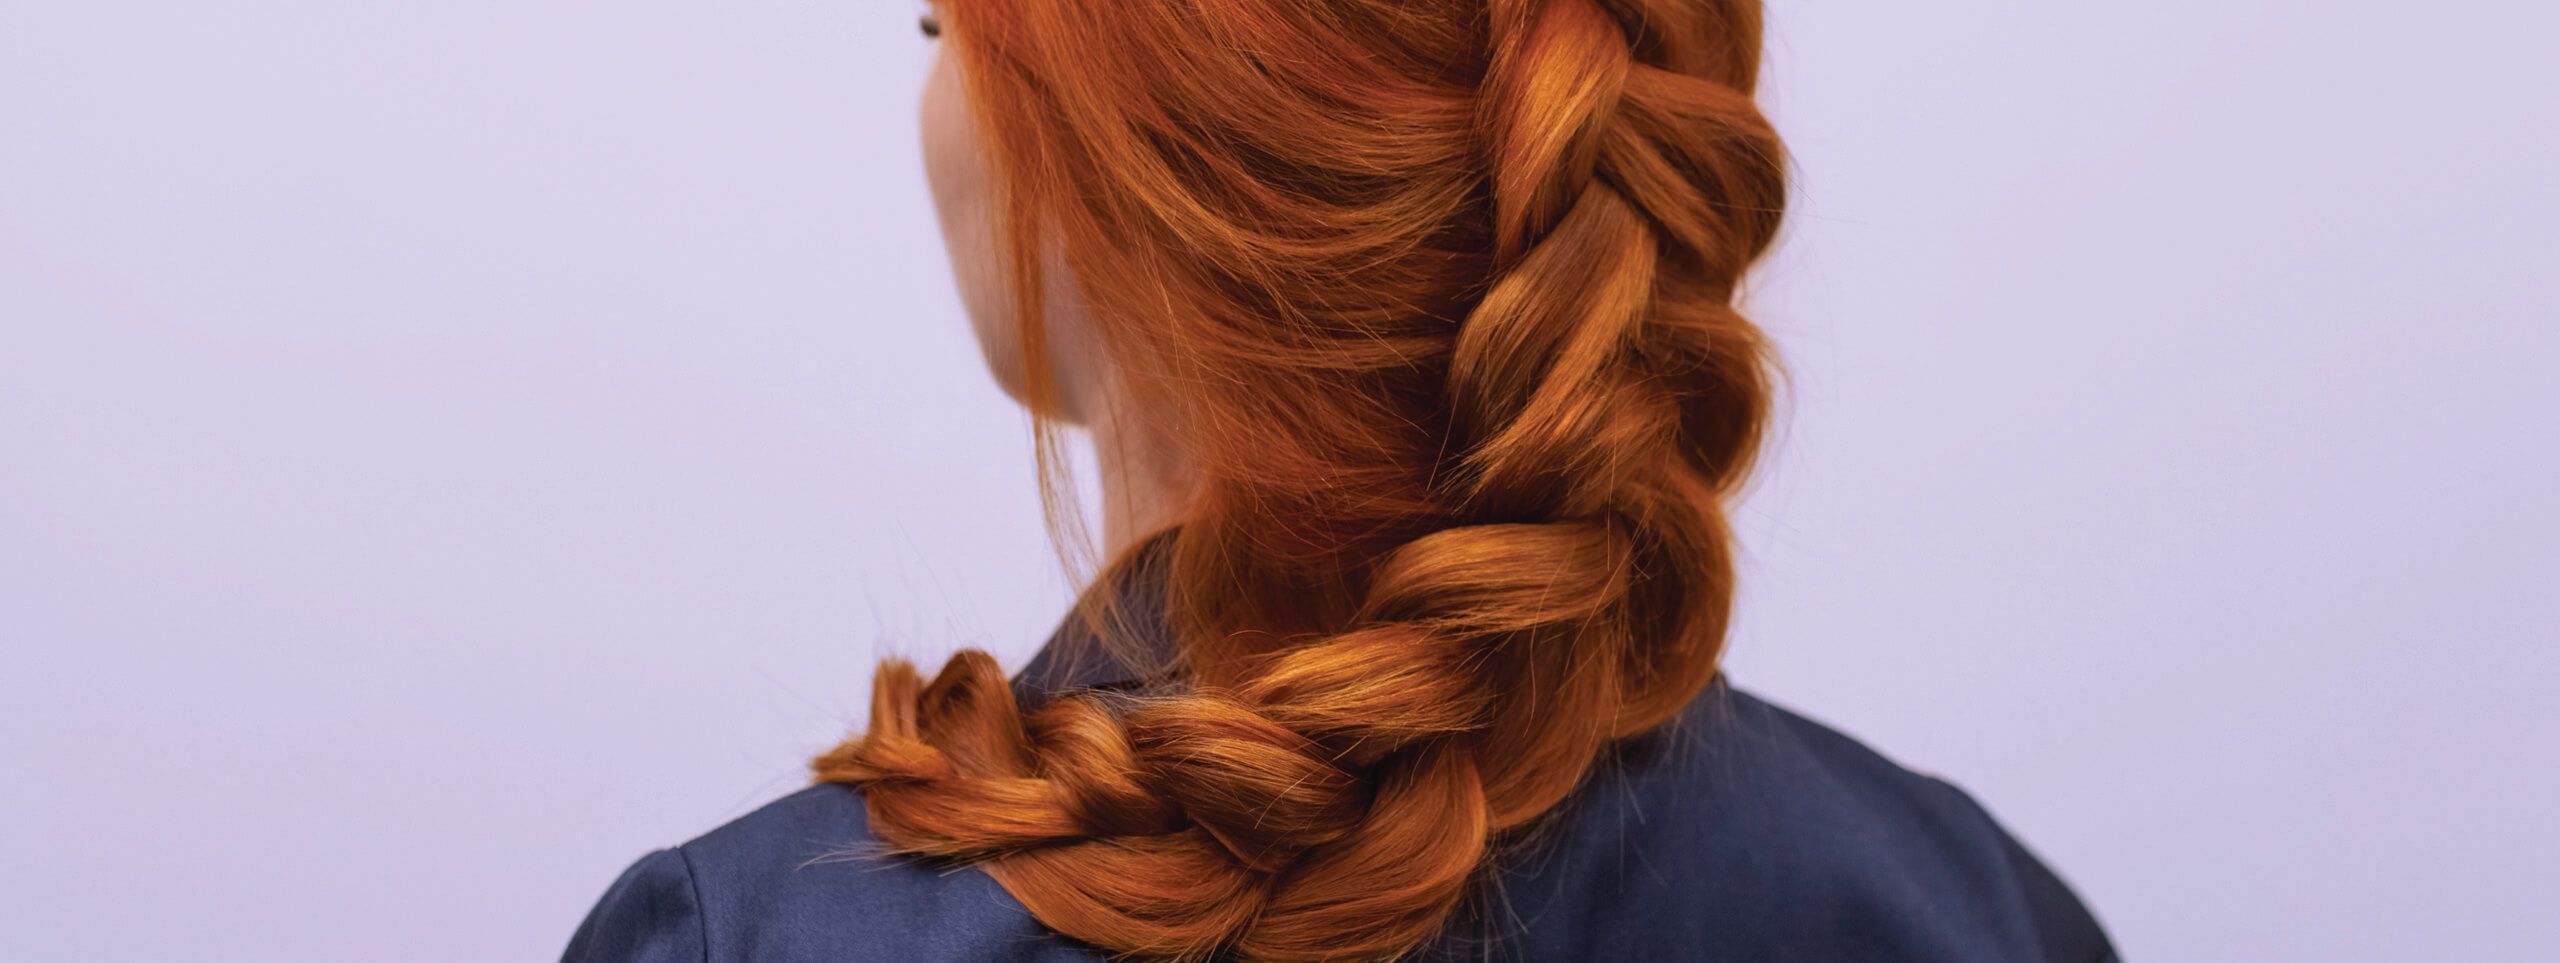 Braid Hairstyles That Are Easy To Try